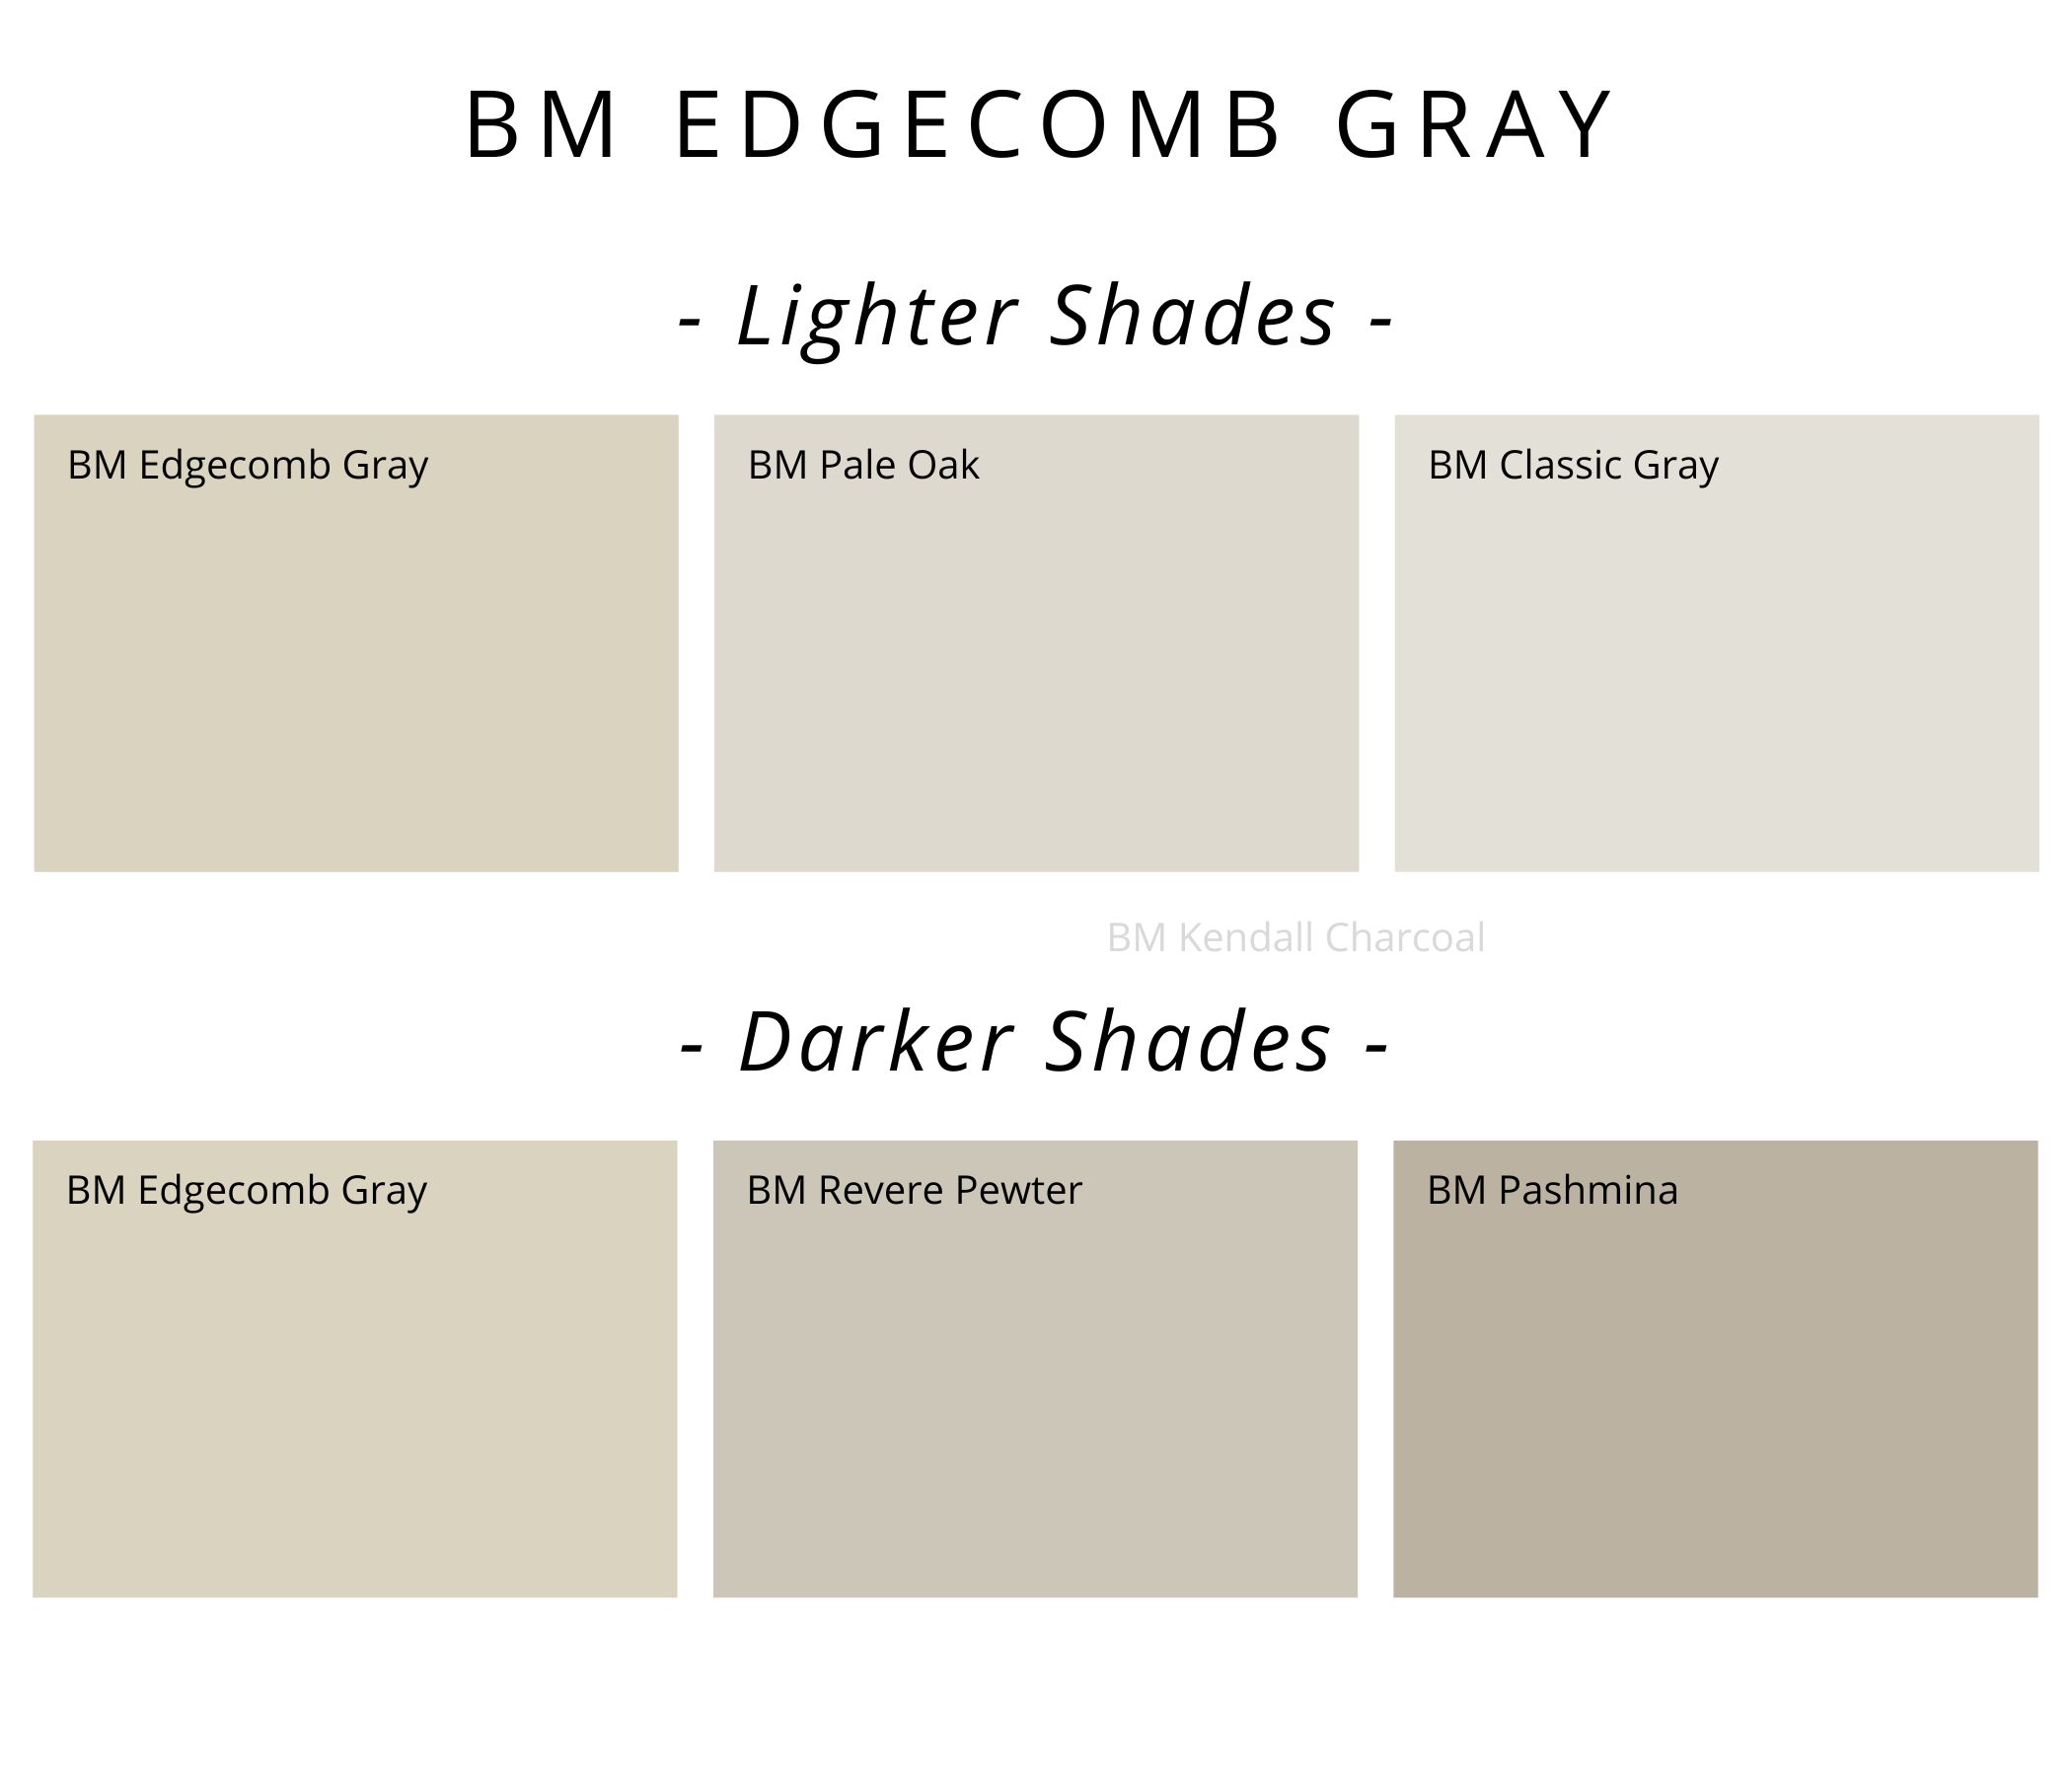 one shade lighter than edgecomb gray and one shade darker than edgecomb gray